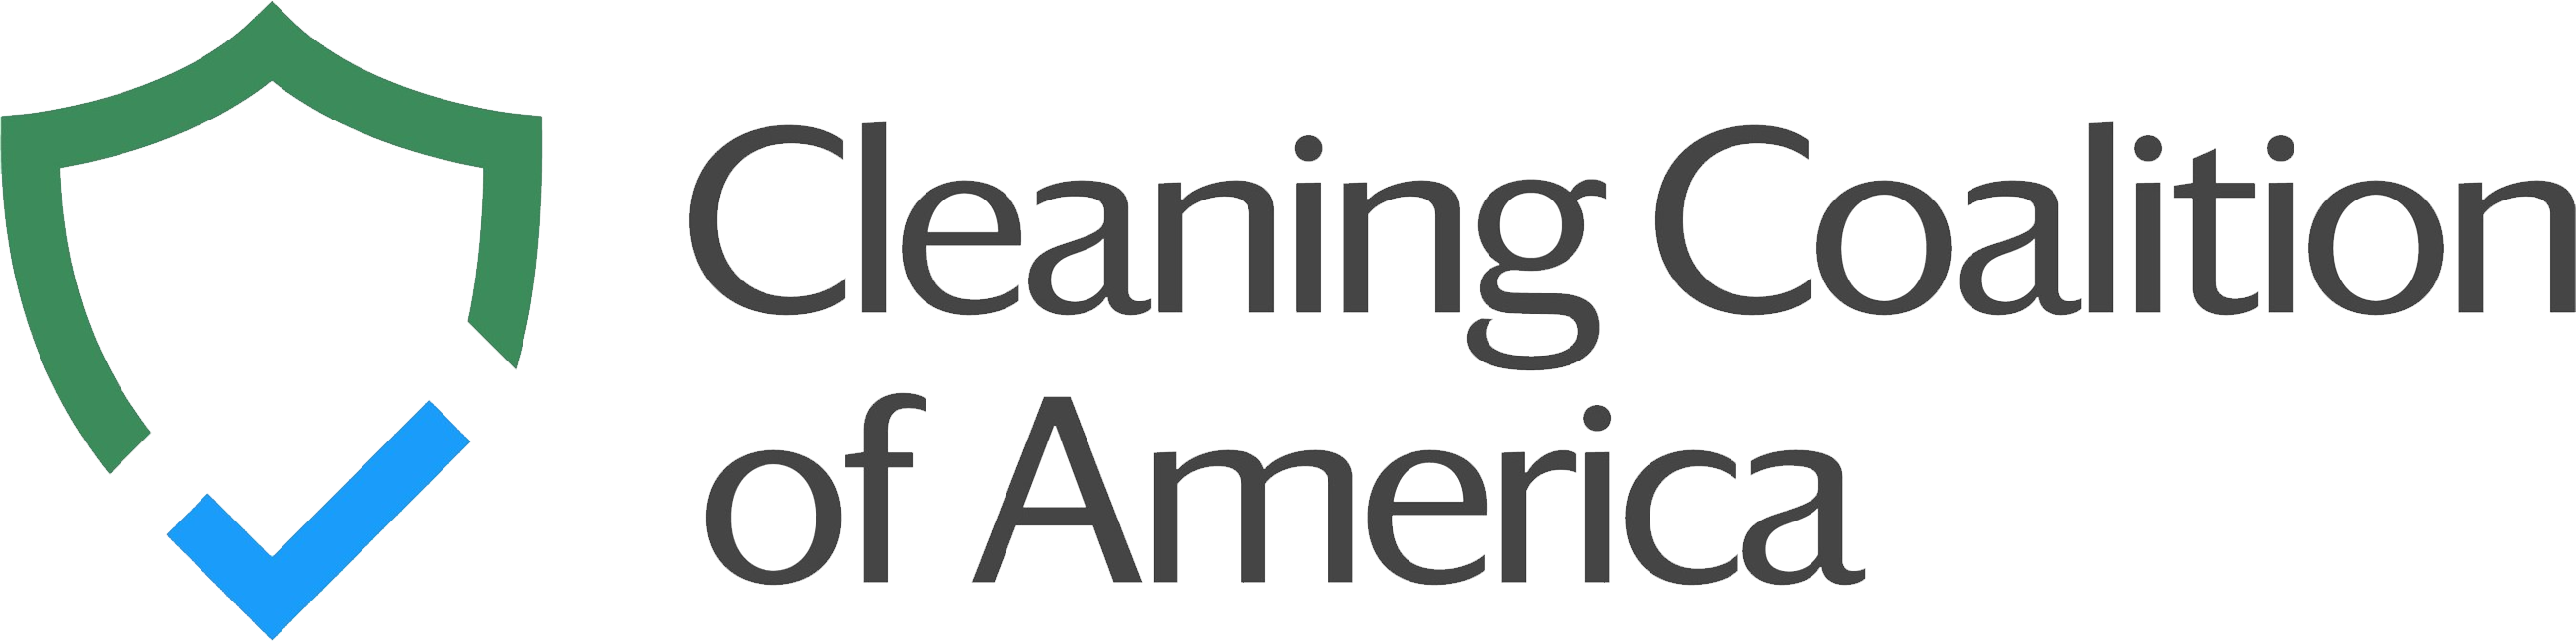 Cleaning Coalition of America (CCA)